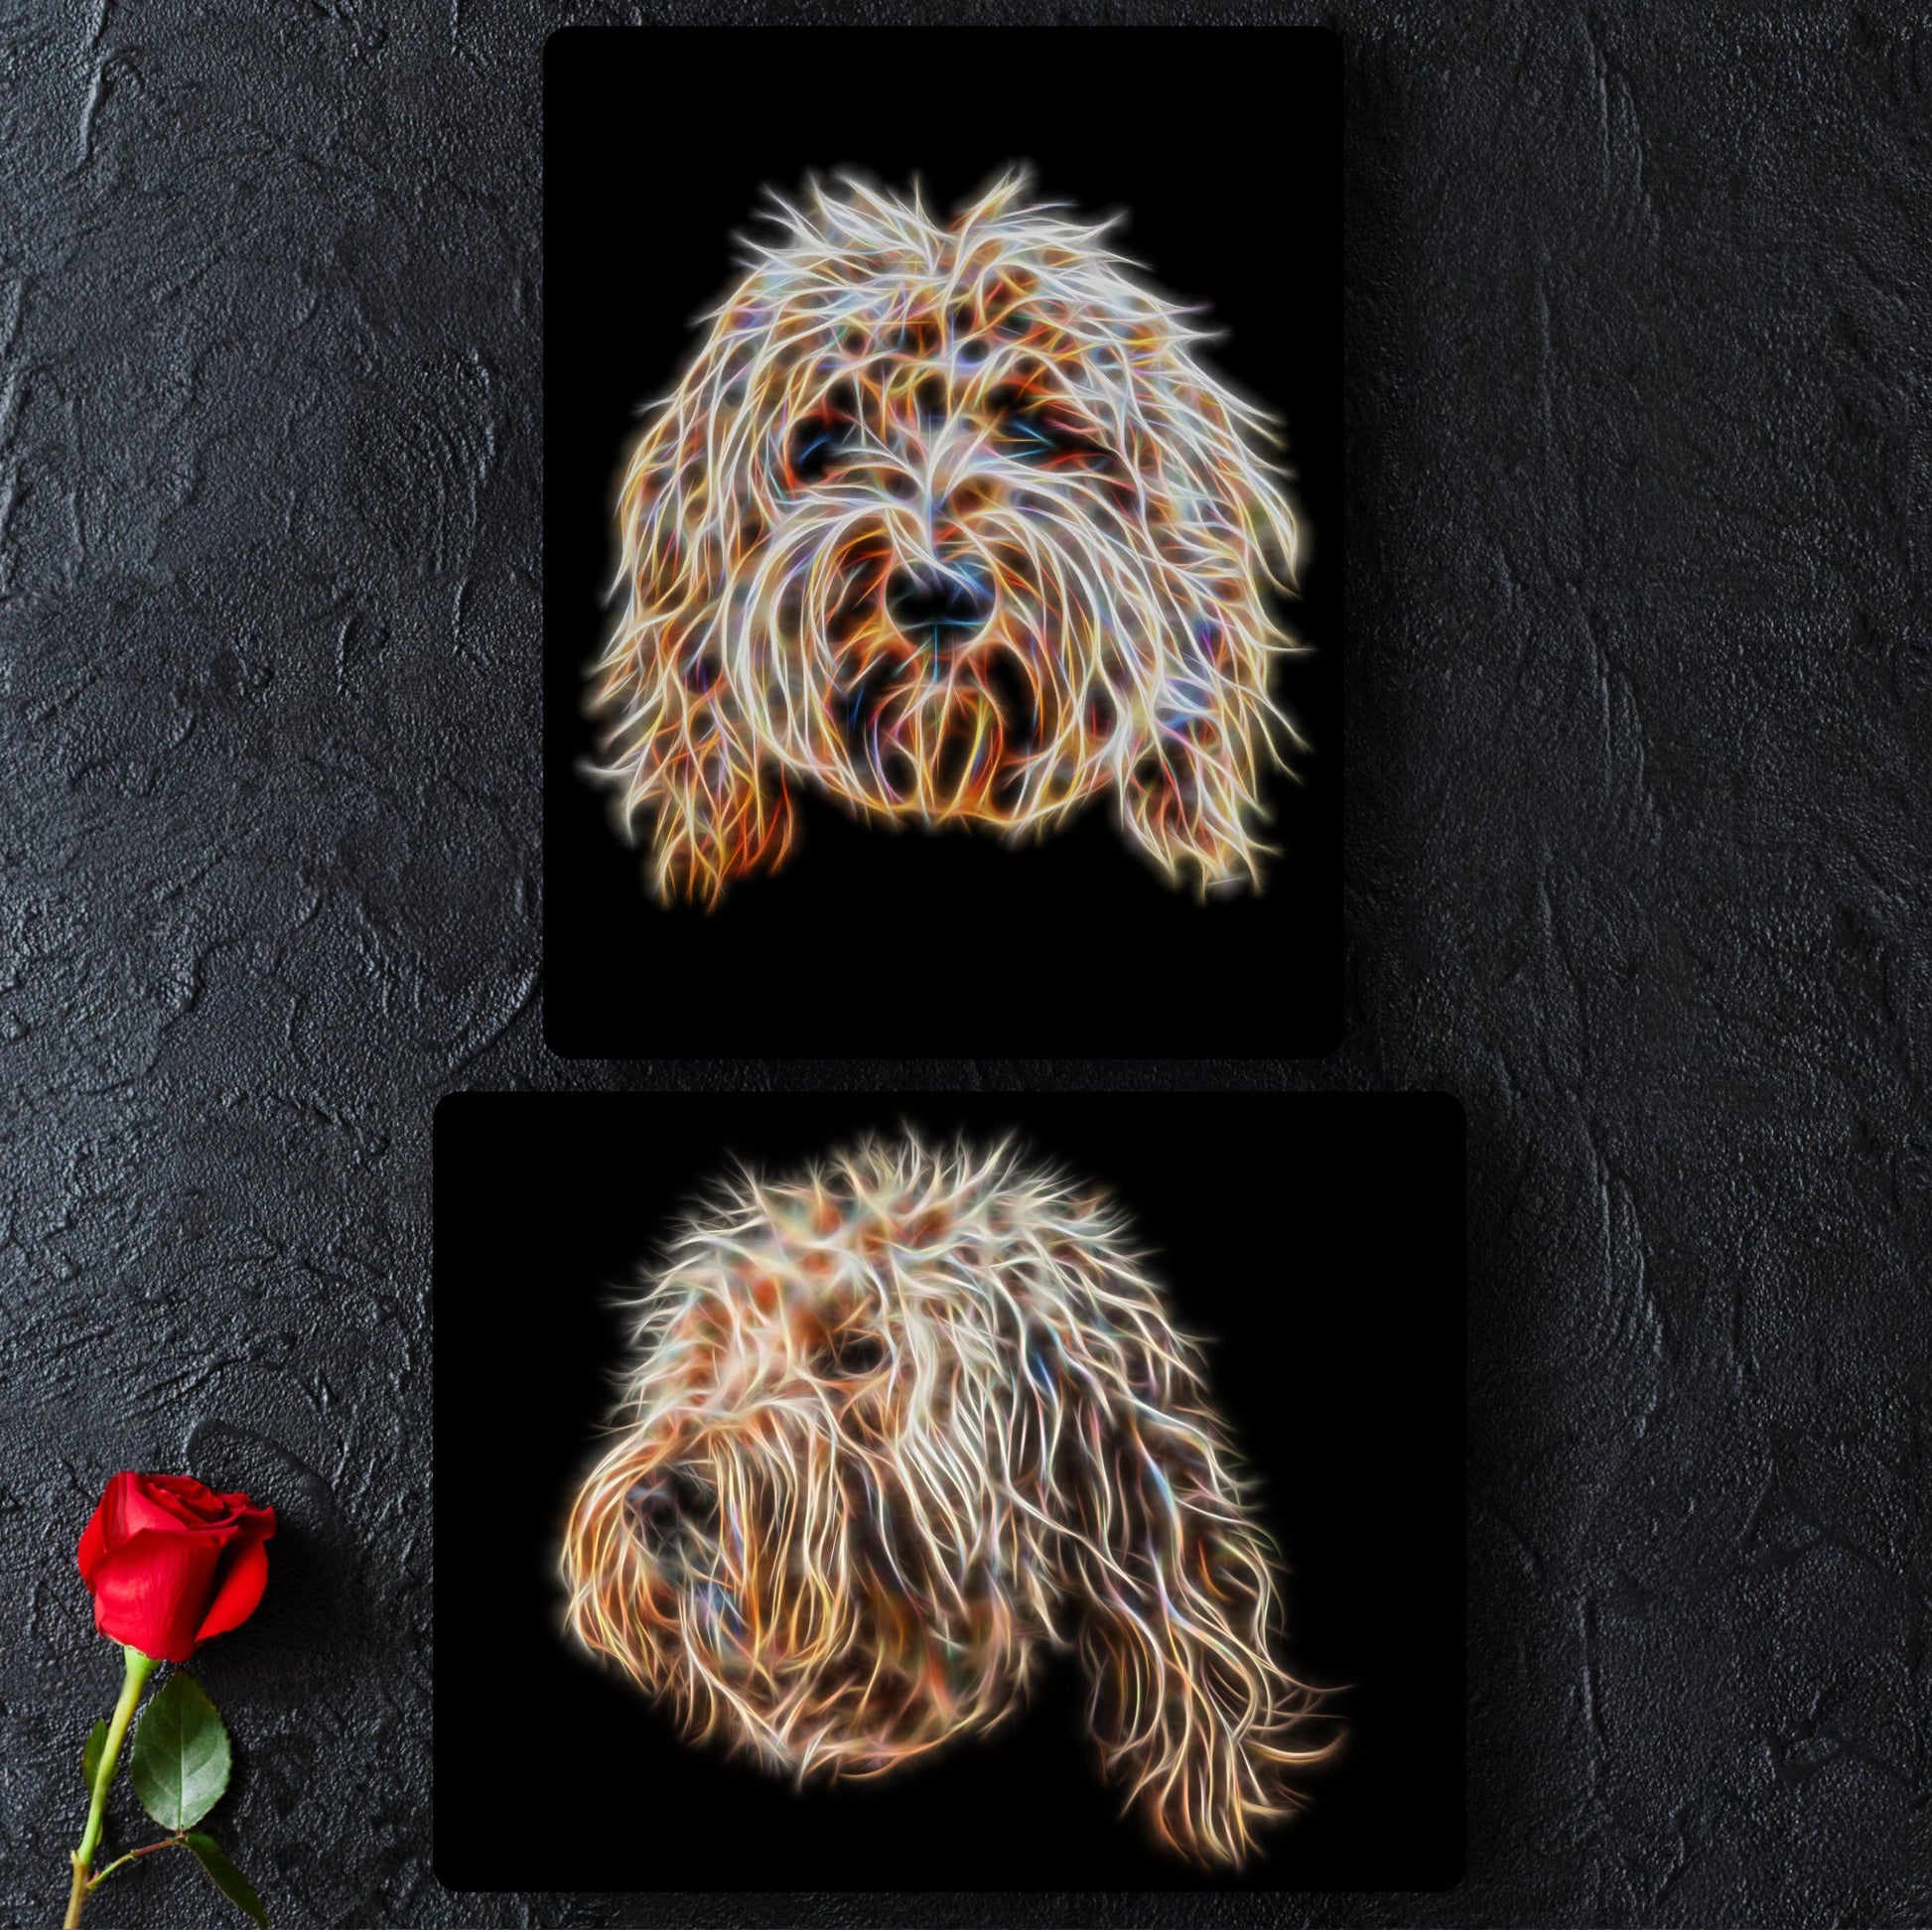 Gold Labradoodle Metal Wall Plaque with Stunning Fractal Art Design.